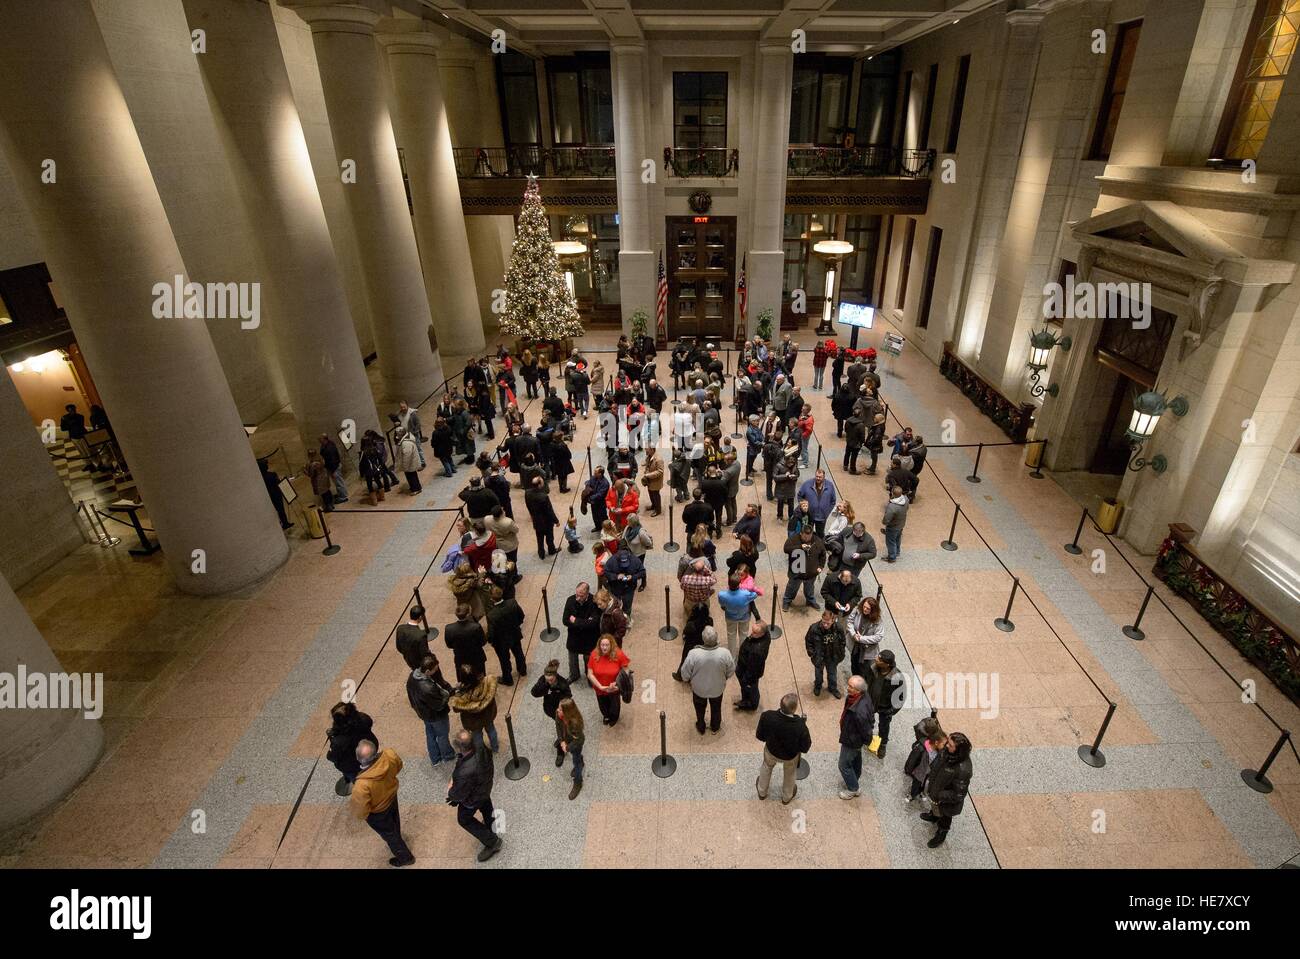 Members of the public wait in line to pay their respects to astronaut and former Senator John Glenn in repose at the Ohio Statehouse December 16, 2016 lying in Columbus, Ohio. The former Marine pilot, Senator and first man to orbit the earth died last week at the age of 95. Stock Photo